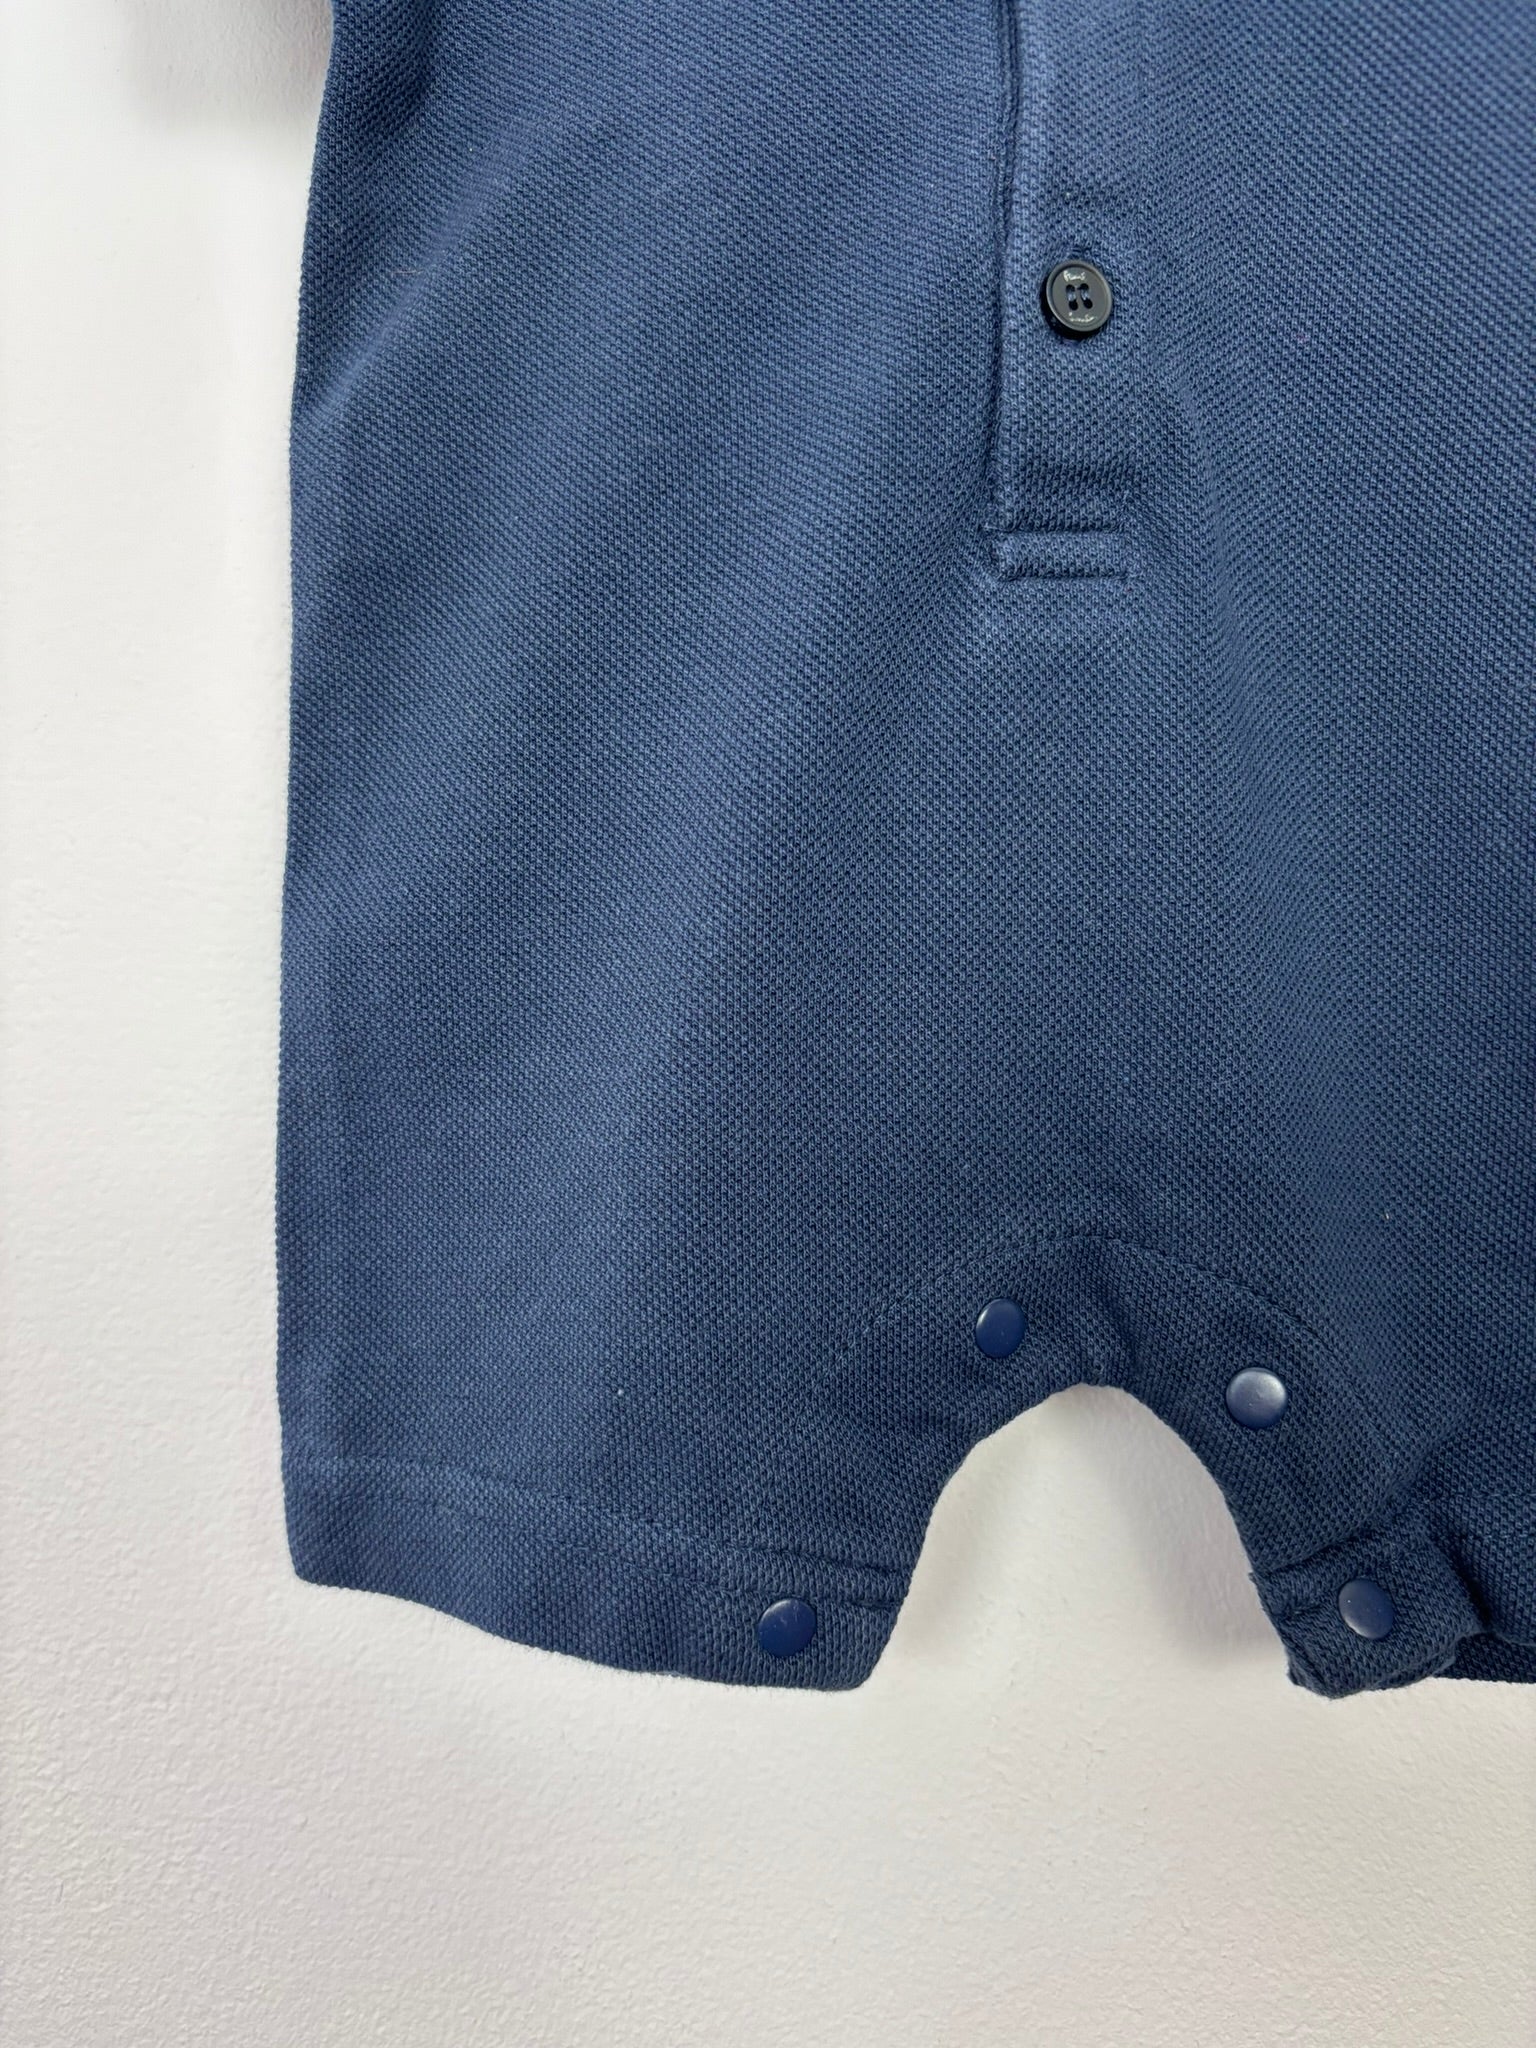 Paul Smith 1 Month-Rompers-Second Snuggle Preloved